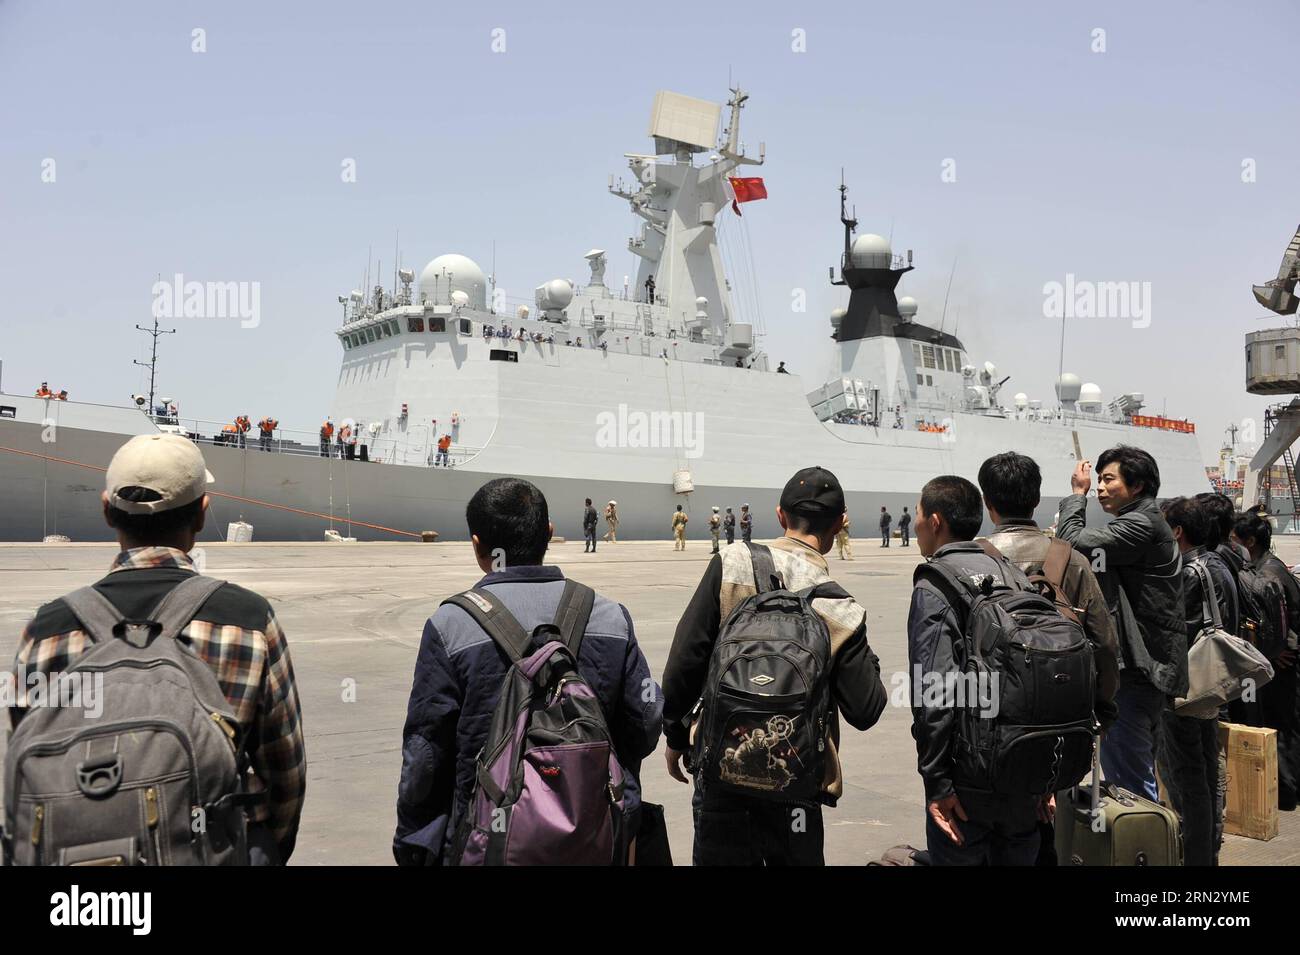 (150330) -- AL-HODAYDA(YEMEN), March 30, 2015 -- Chinese citizens wait to get on the a navy frigate to leave Yemen, in the al-Hodayda port in western Yemen, on March 30, 2015. Four hundred and forty-nine Chinese nationals left the Yemeni coastal city of Al-Hodayda on Monday aboard a Chinese navy frigate. On Sunday, 122 other Chinese nationals were evacuated from the Yemeni city of Aden and have already arrived in Djibouti. ) YEMEN-AL-HODAYDA-CHINESE CITIZENS-WITHDRAW HanixAli PUBLICATIONxNOTxINxCHN   Al  Yemen March 30 2015 Chinese Citizens Wait to Get ON The a Navy Frigate to Leave Yemen in T Stock Photo